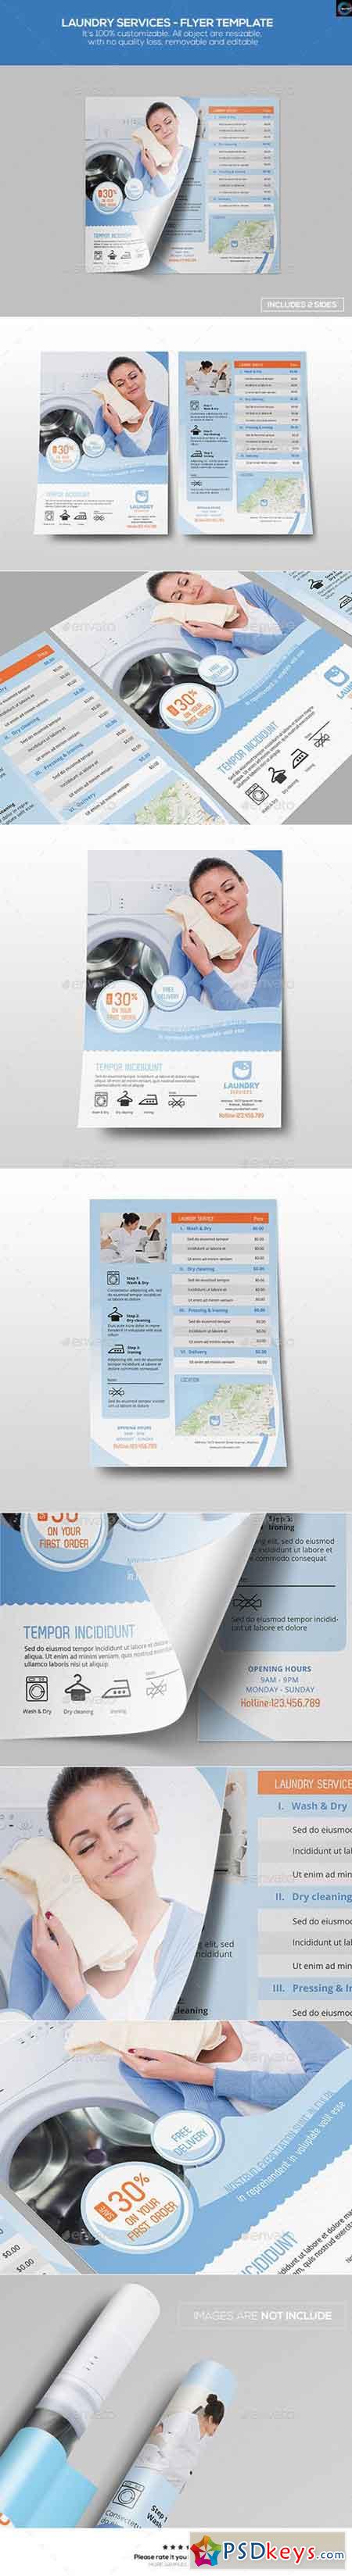 Laundry Services - Flyer Template 12597923